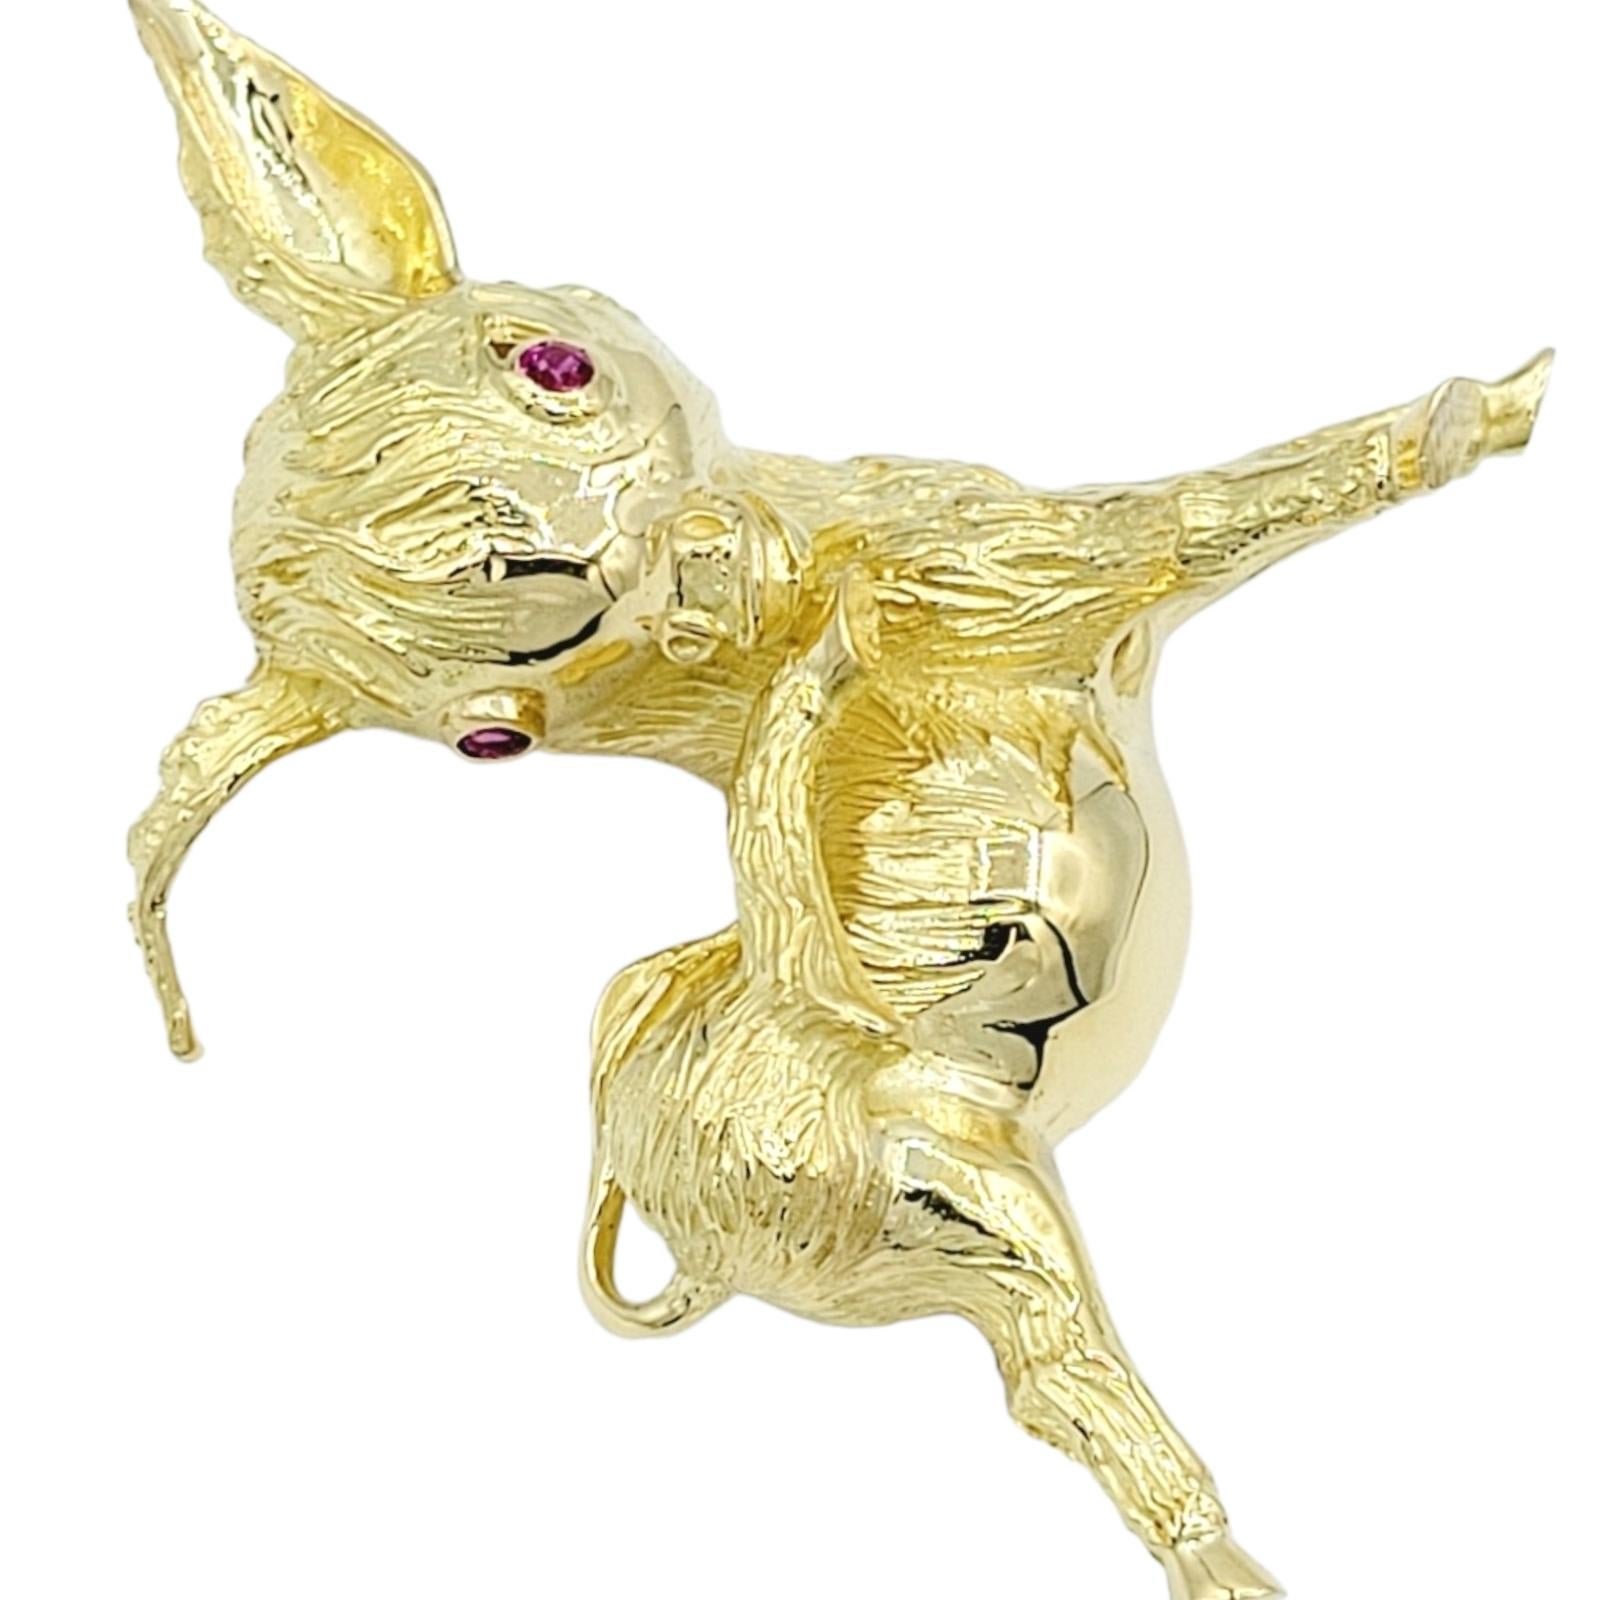 Introducing a delightfully darling dancing burro brooch, a playful piece that embodies elegance and whimsy. Crafted with meticulous artistry, this brooch captures the joyful spirit of a dancing donkey in intricate detail.

Fashioned from lustrous 18